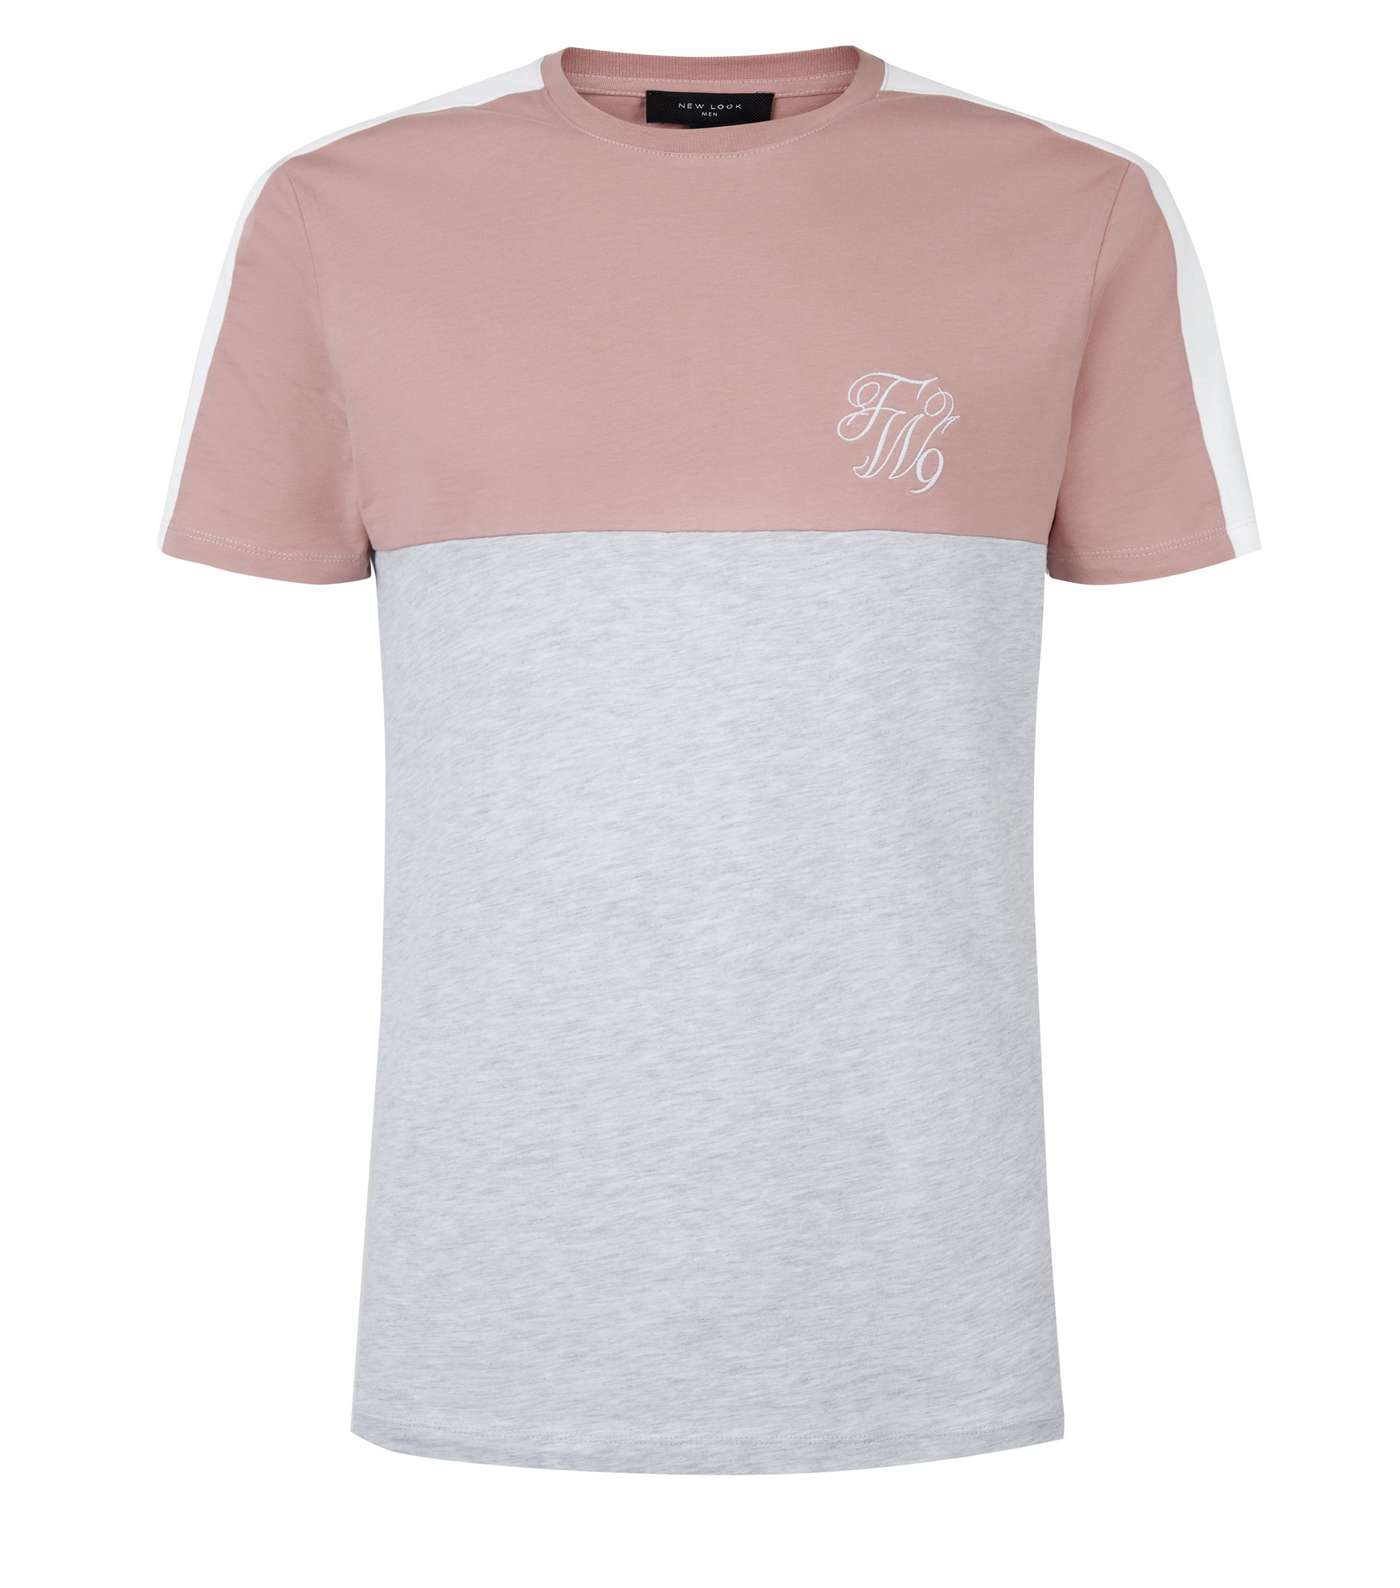 Mid Pink TW9 Embroidered Muscle Fit T-Shirt Image 4